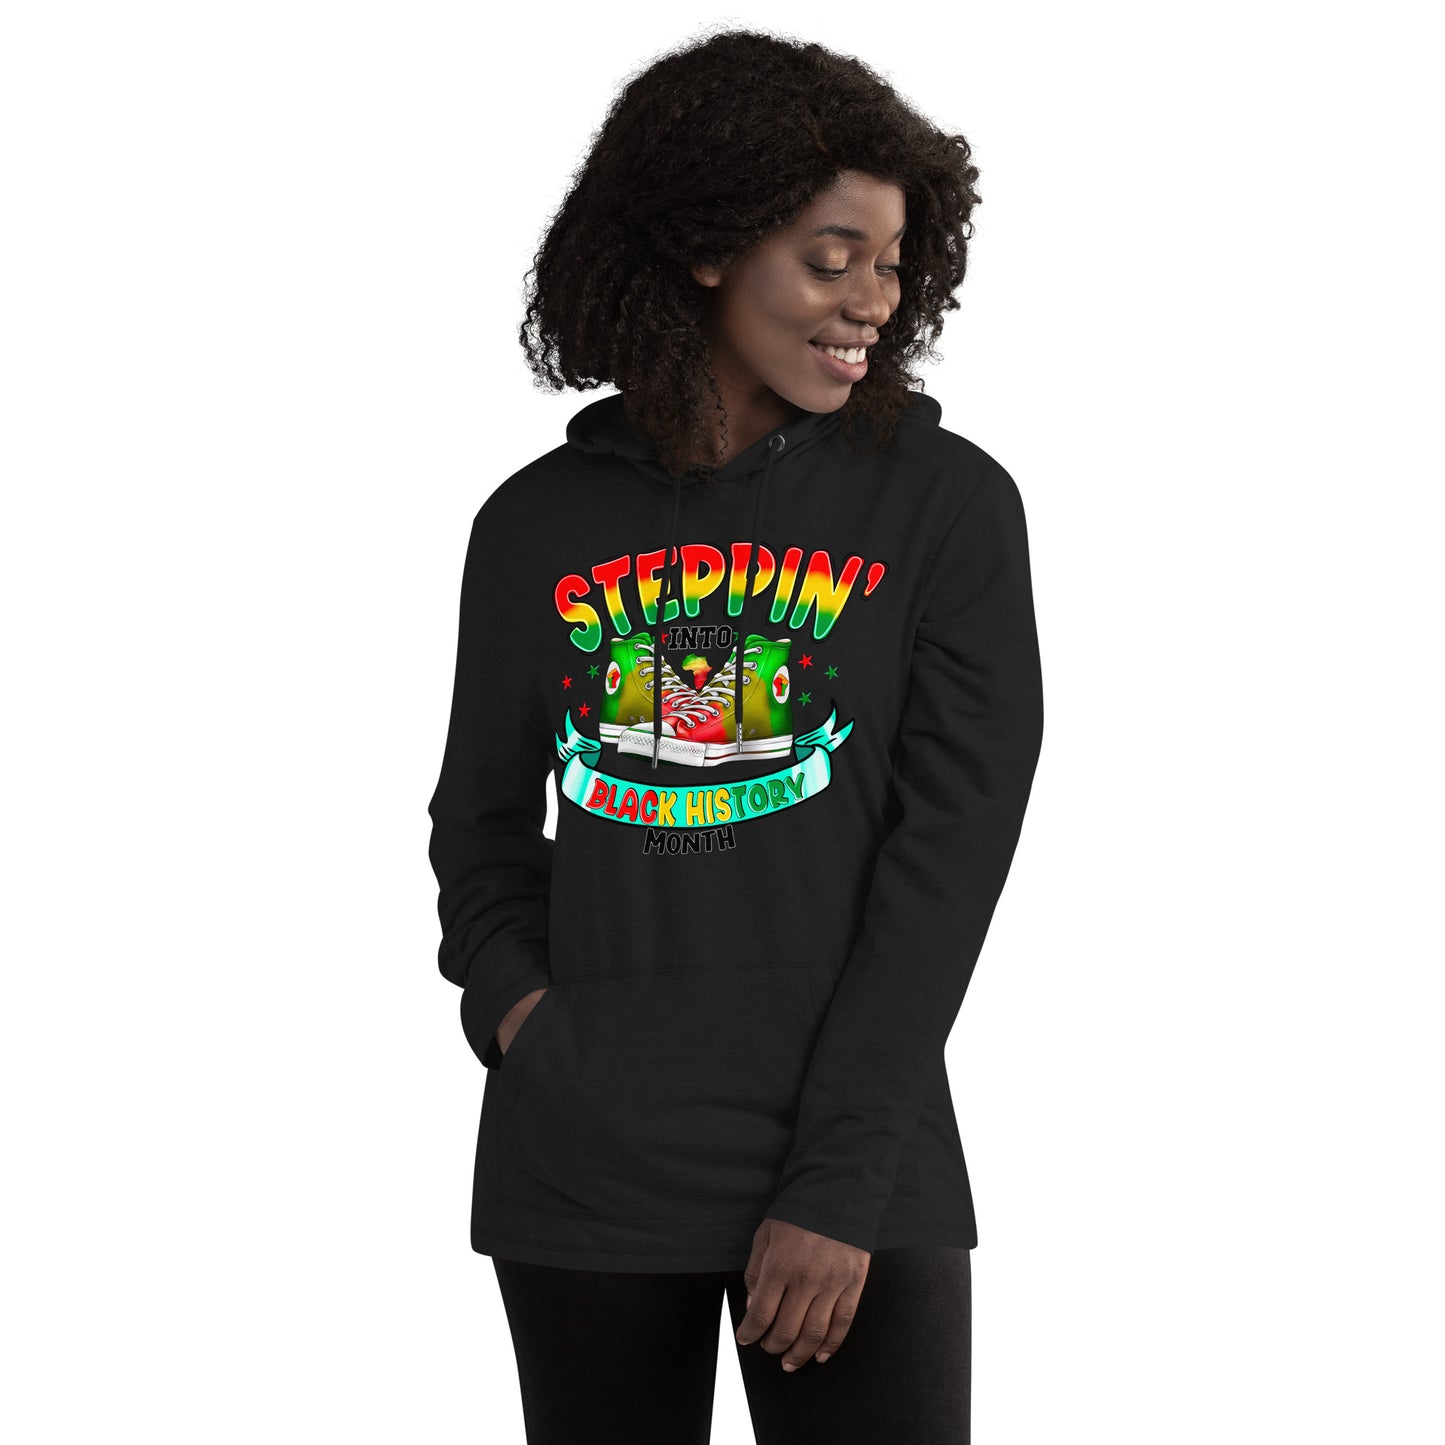 Unisex Lightweight Hoodie - Steppin Into Black History Month